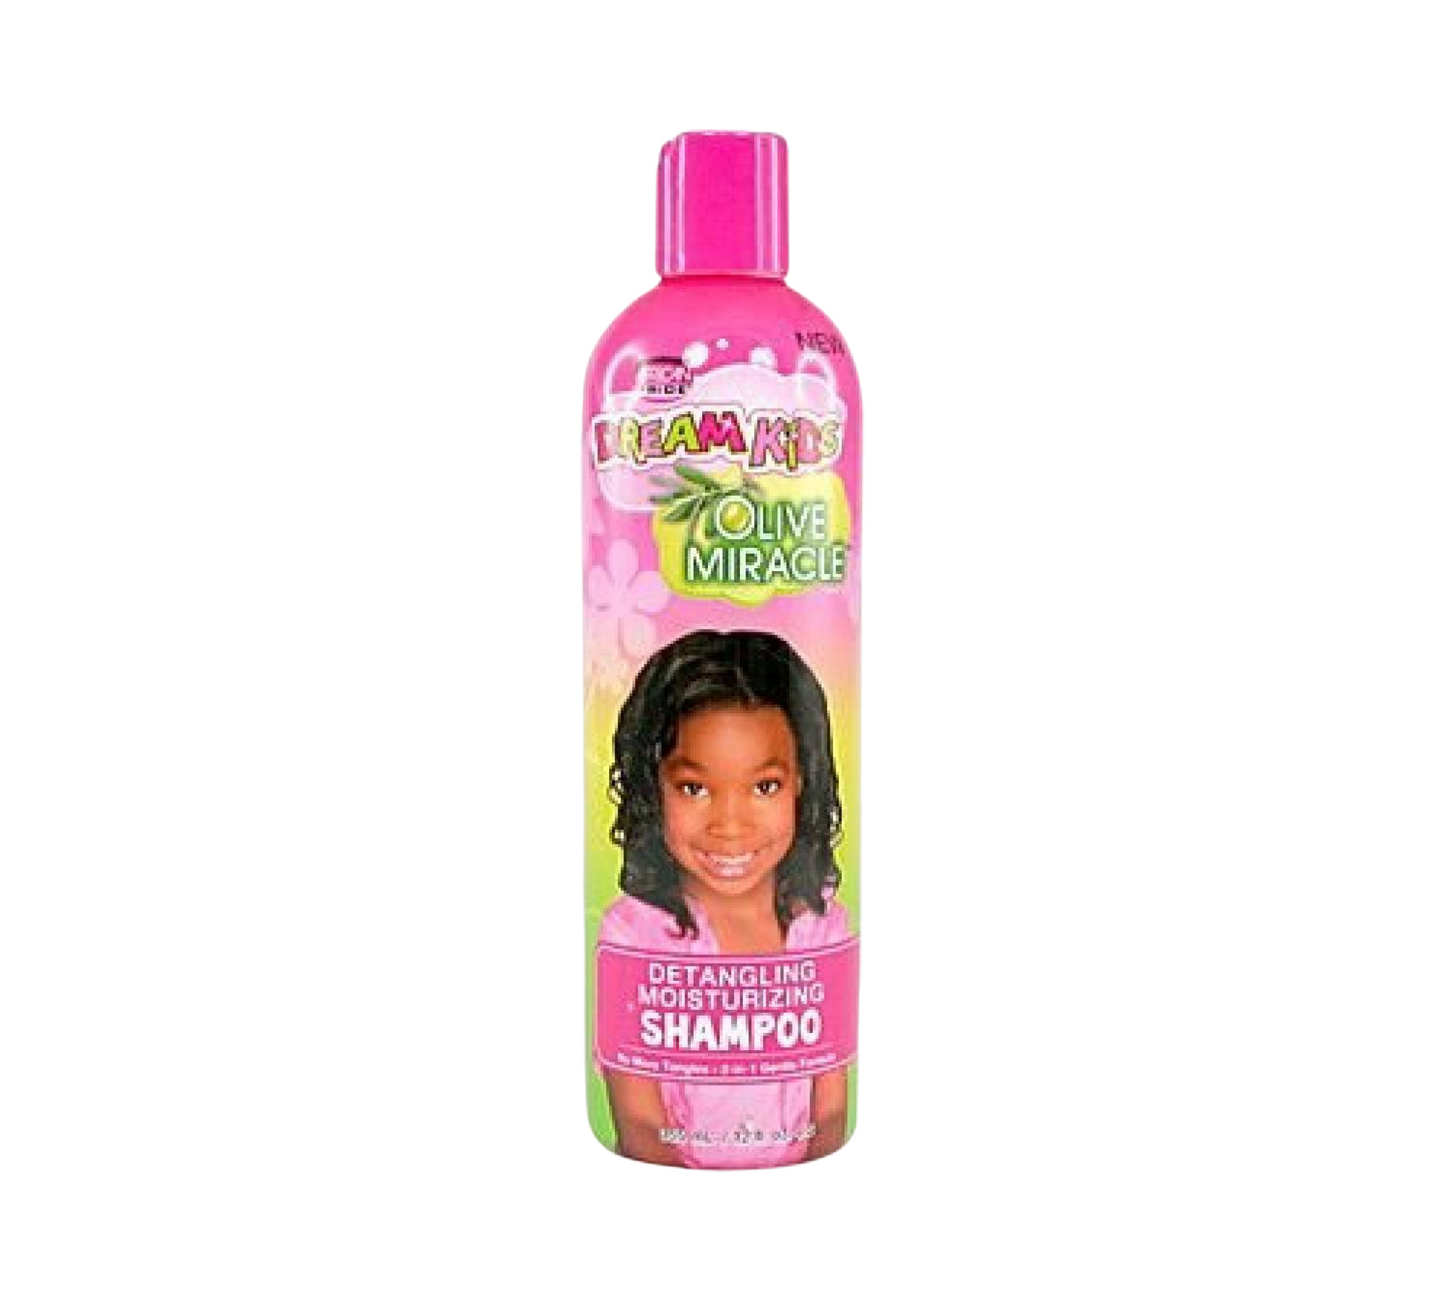 African Pride Dream Kids Olive Miracle Detangling Moisturizing Shampoo - 12 Oz | Gentle Care for Tangle-Free, Hydrated Hair